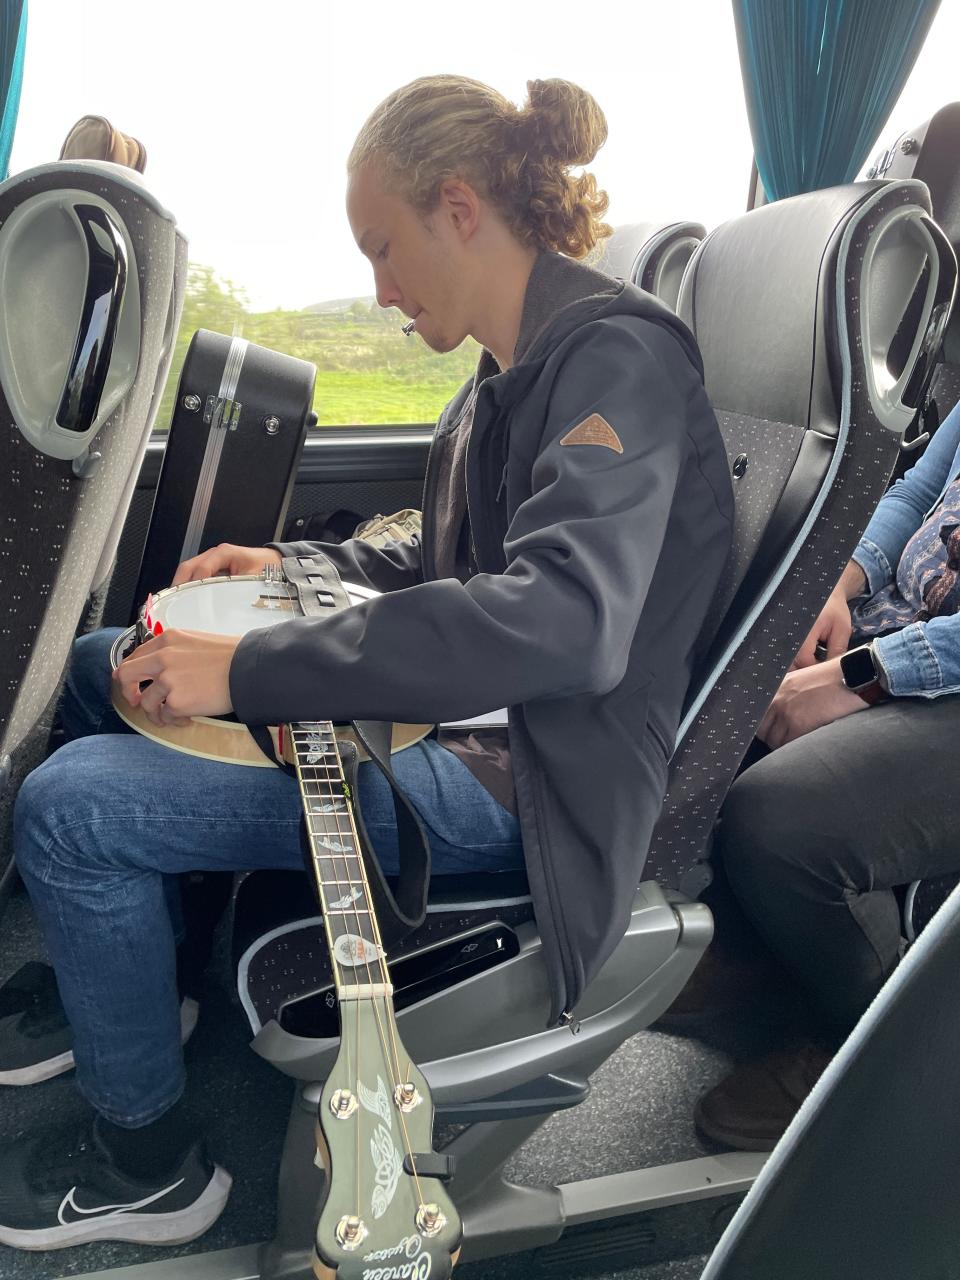 Flynn Whitmore tunes his banjo while on a bus.